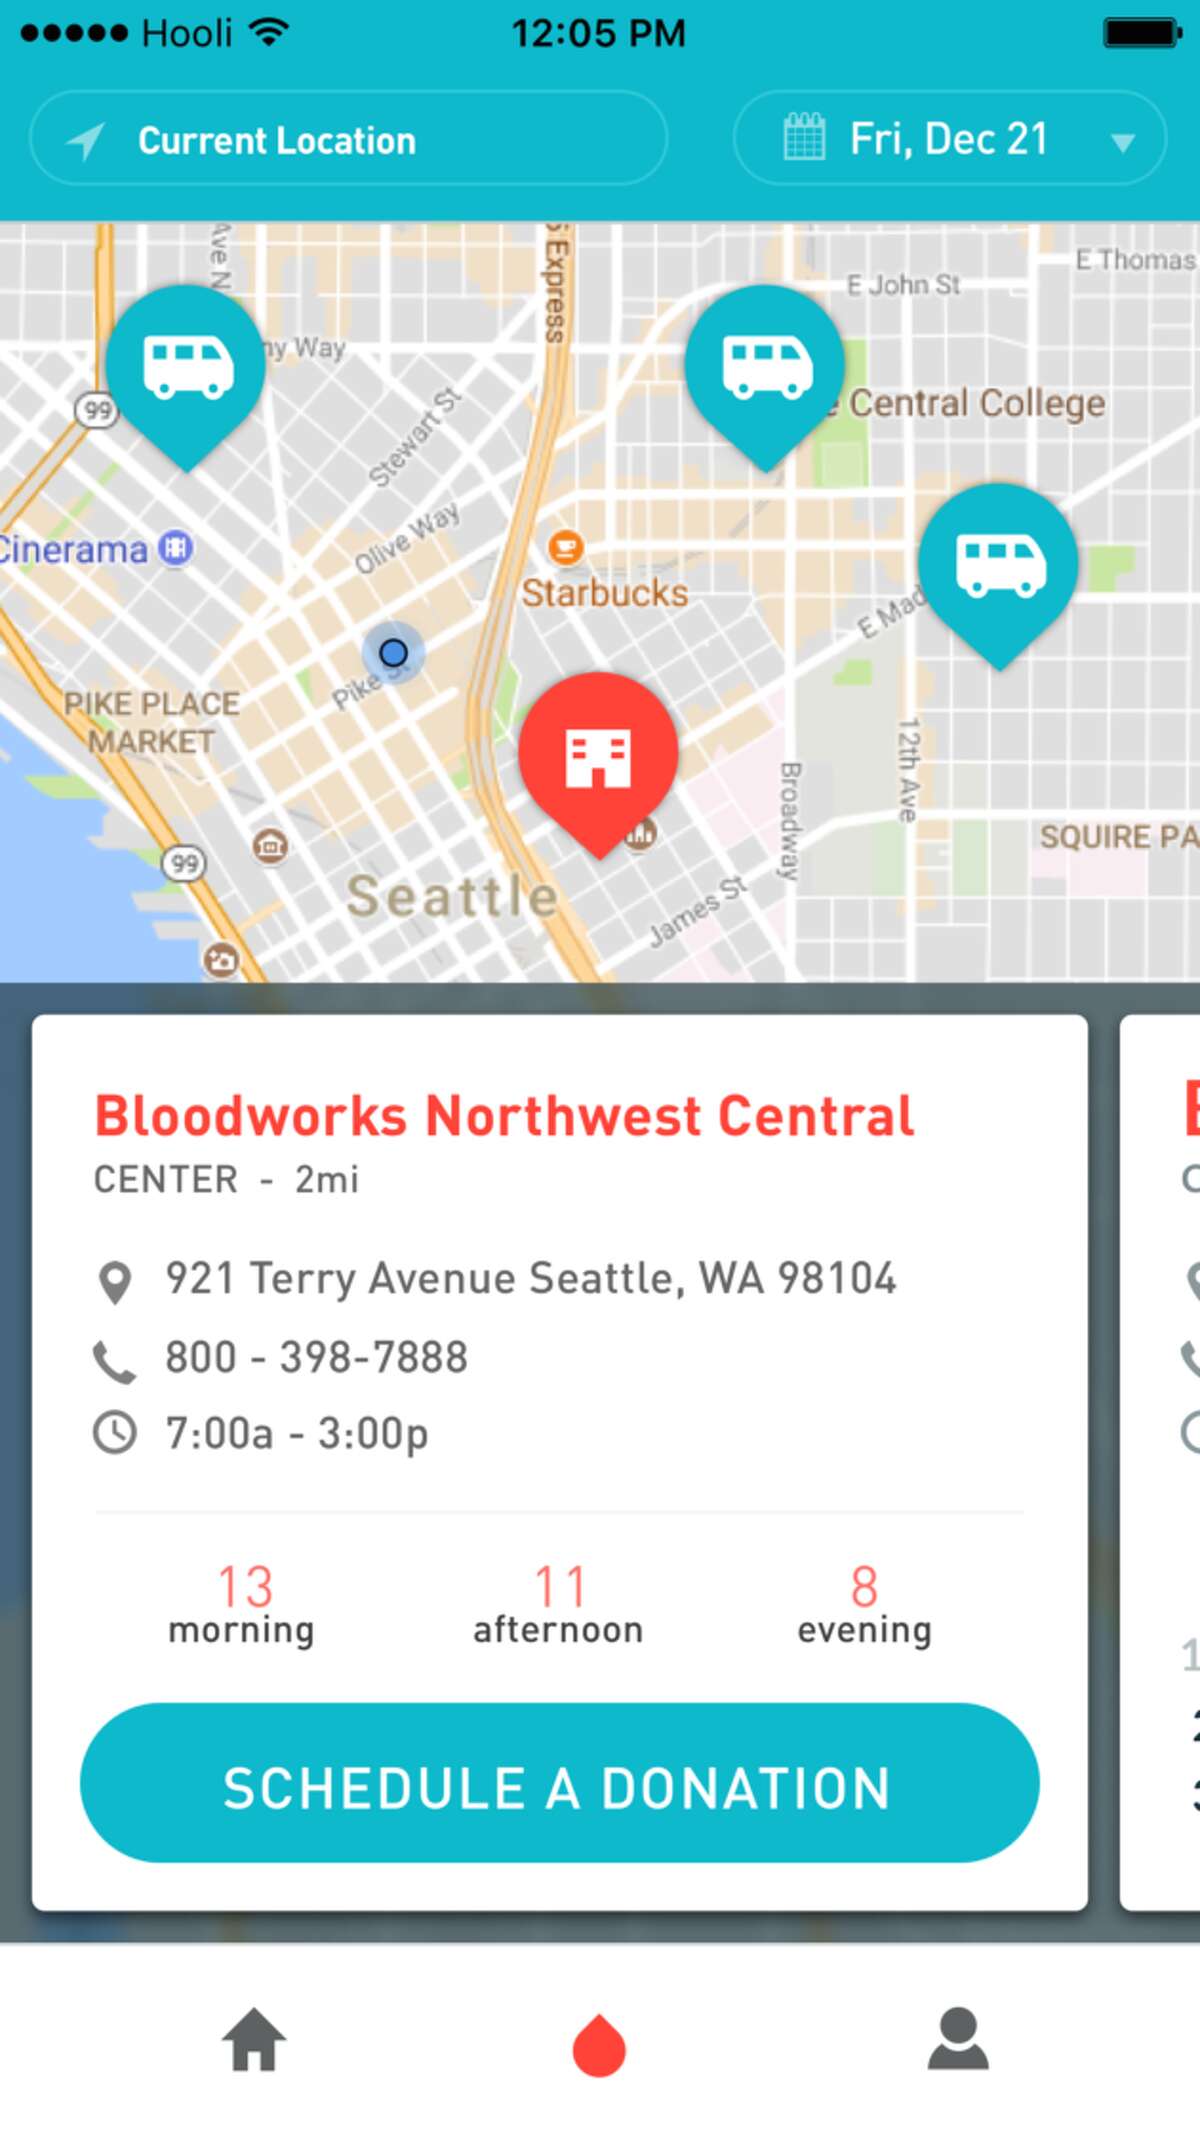 Scheduling an appointment on the Bloodworks Northwest app. (Image courtesy GeekWire)